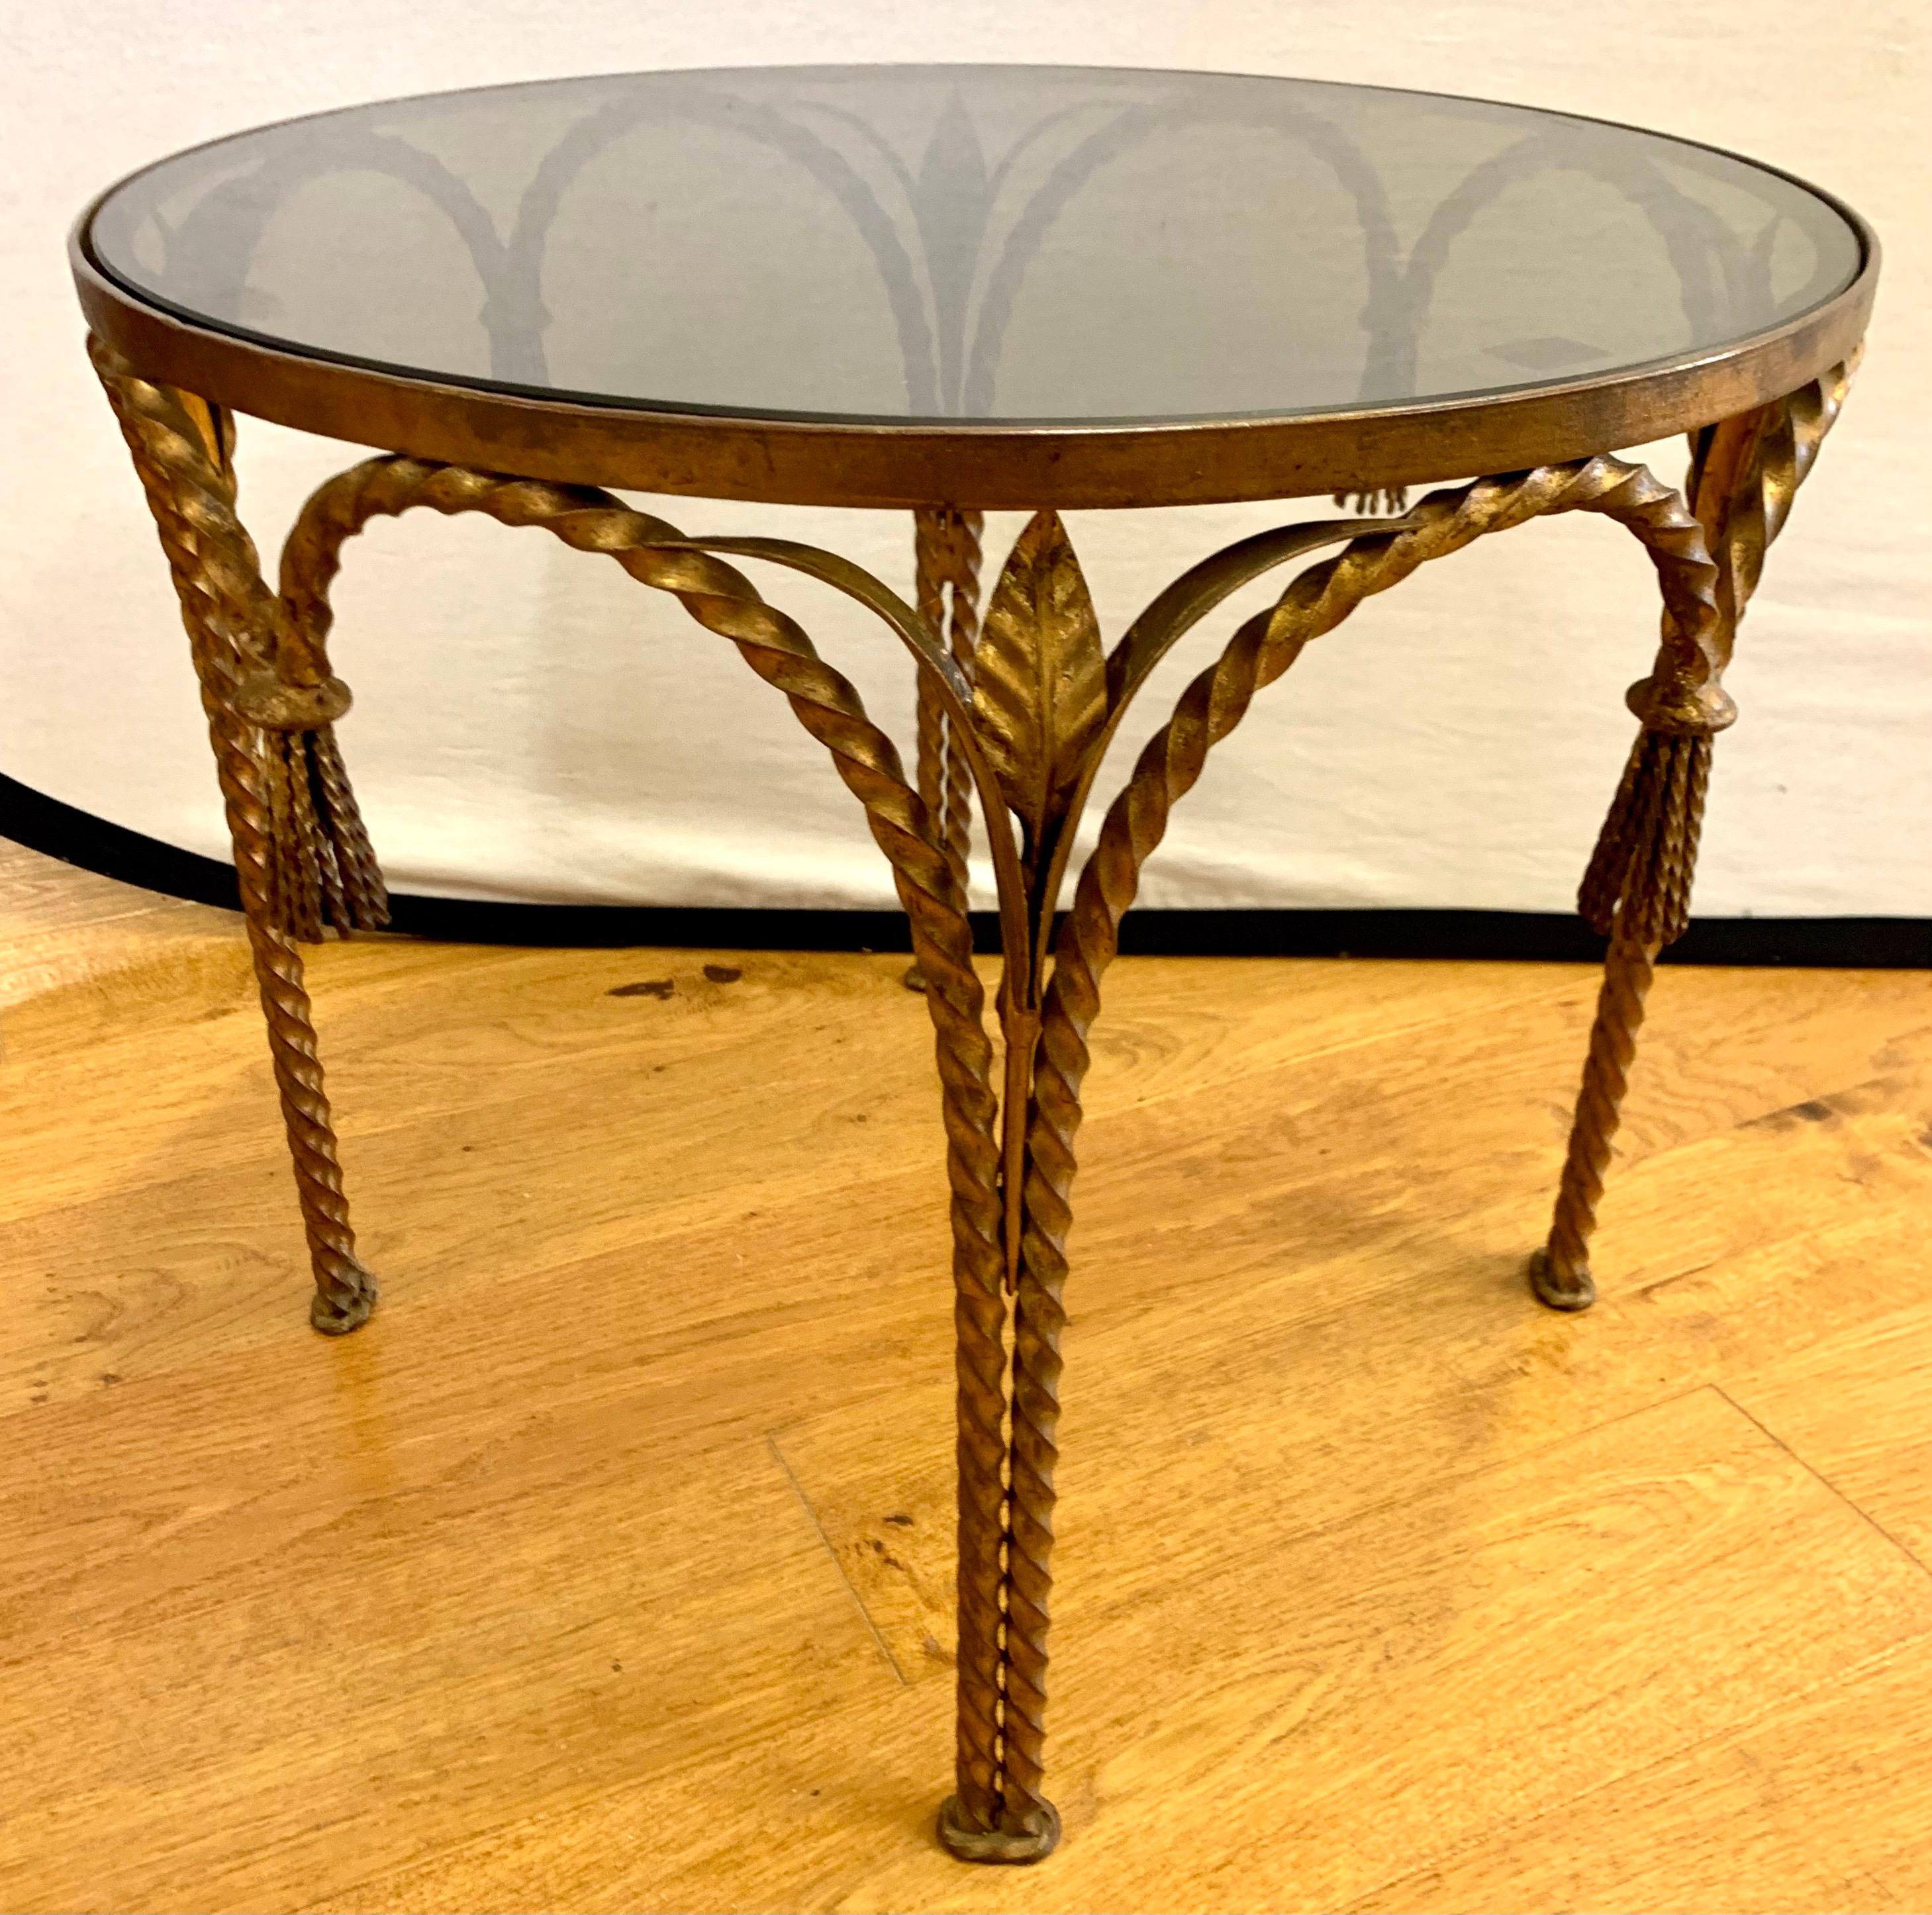 20th Century Hollywood Regency Gilt Metal Rope and Tassel Glass Tables